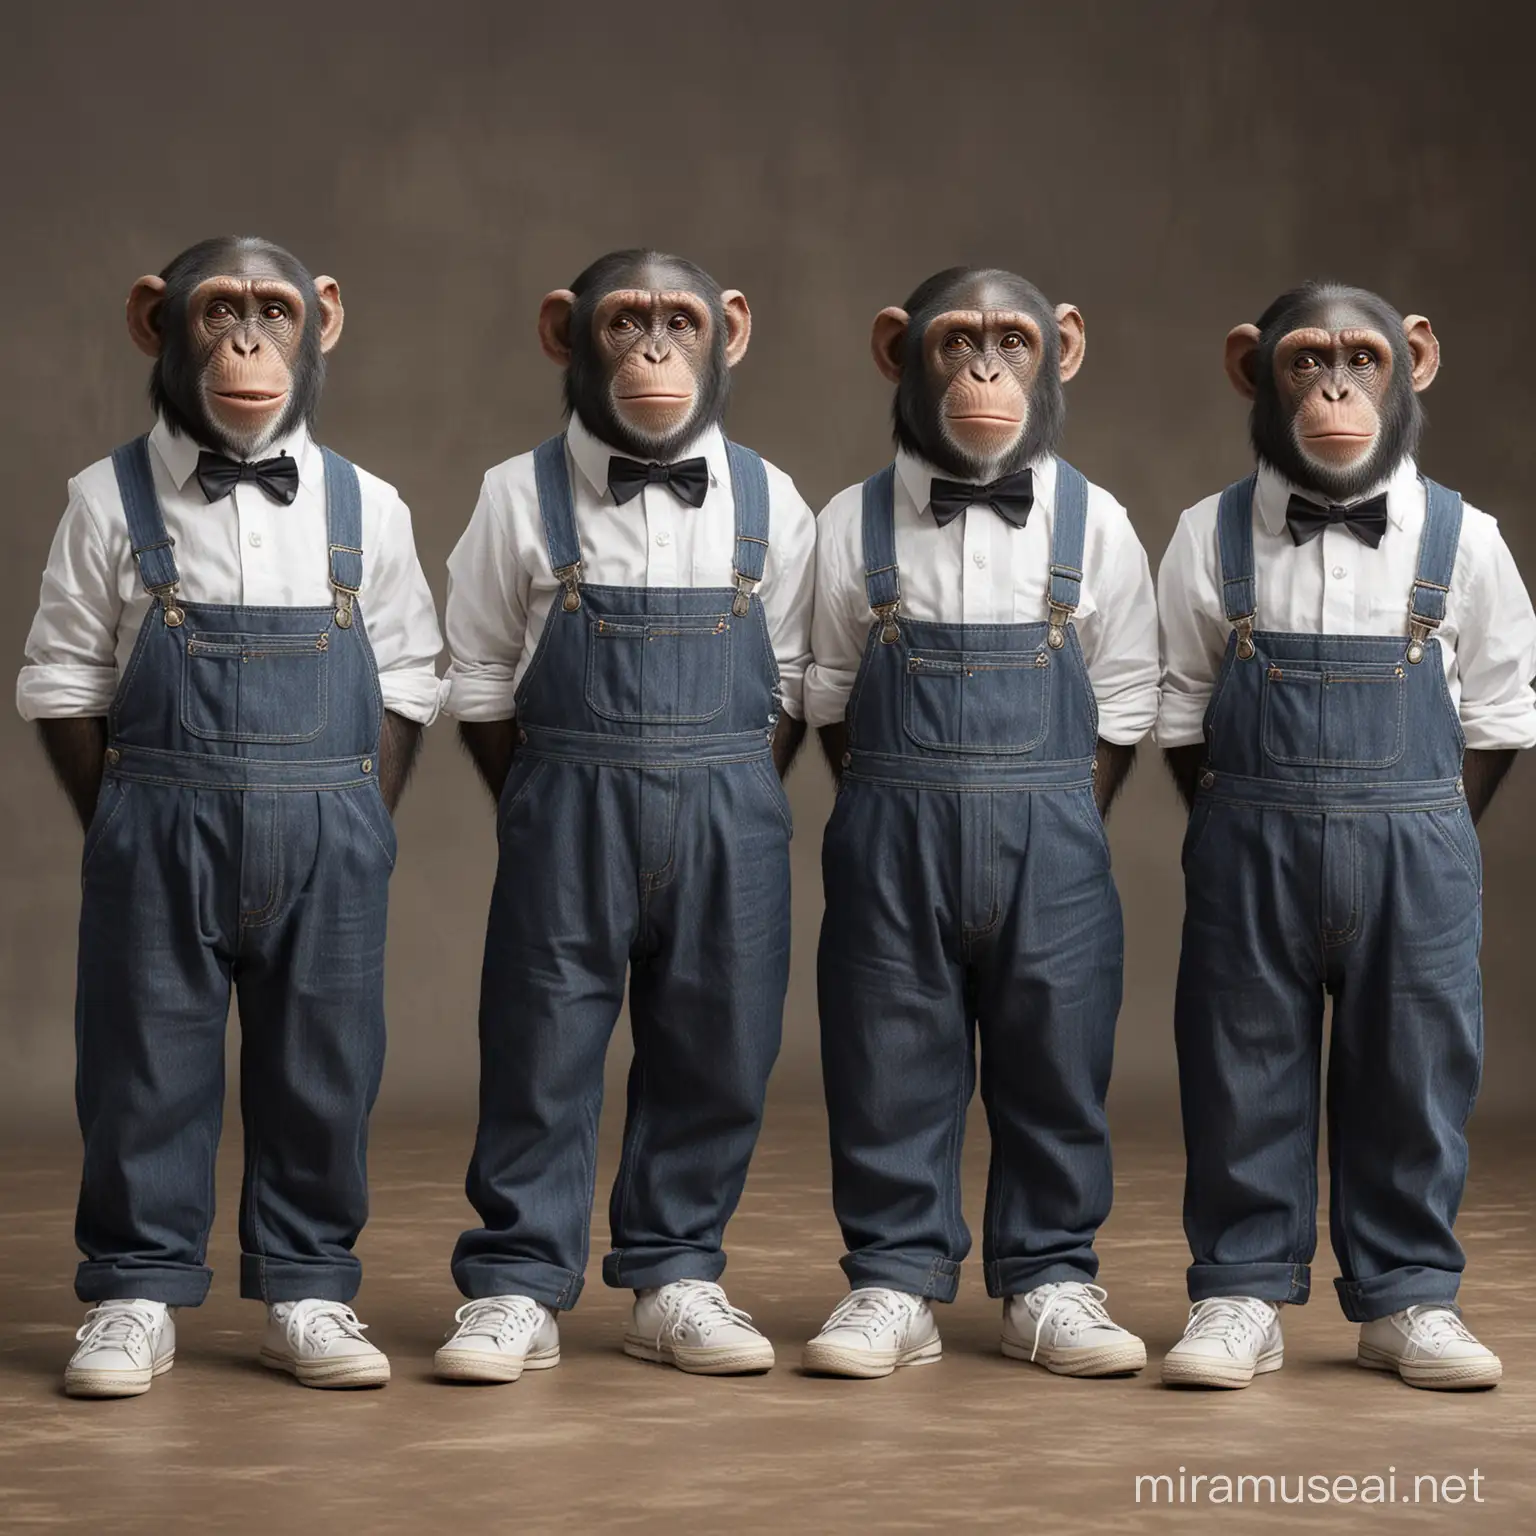 Chimpanzee Quartet Dressed in Overalls and Bow Ties